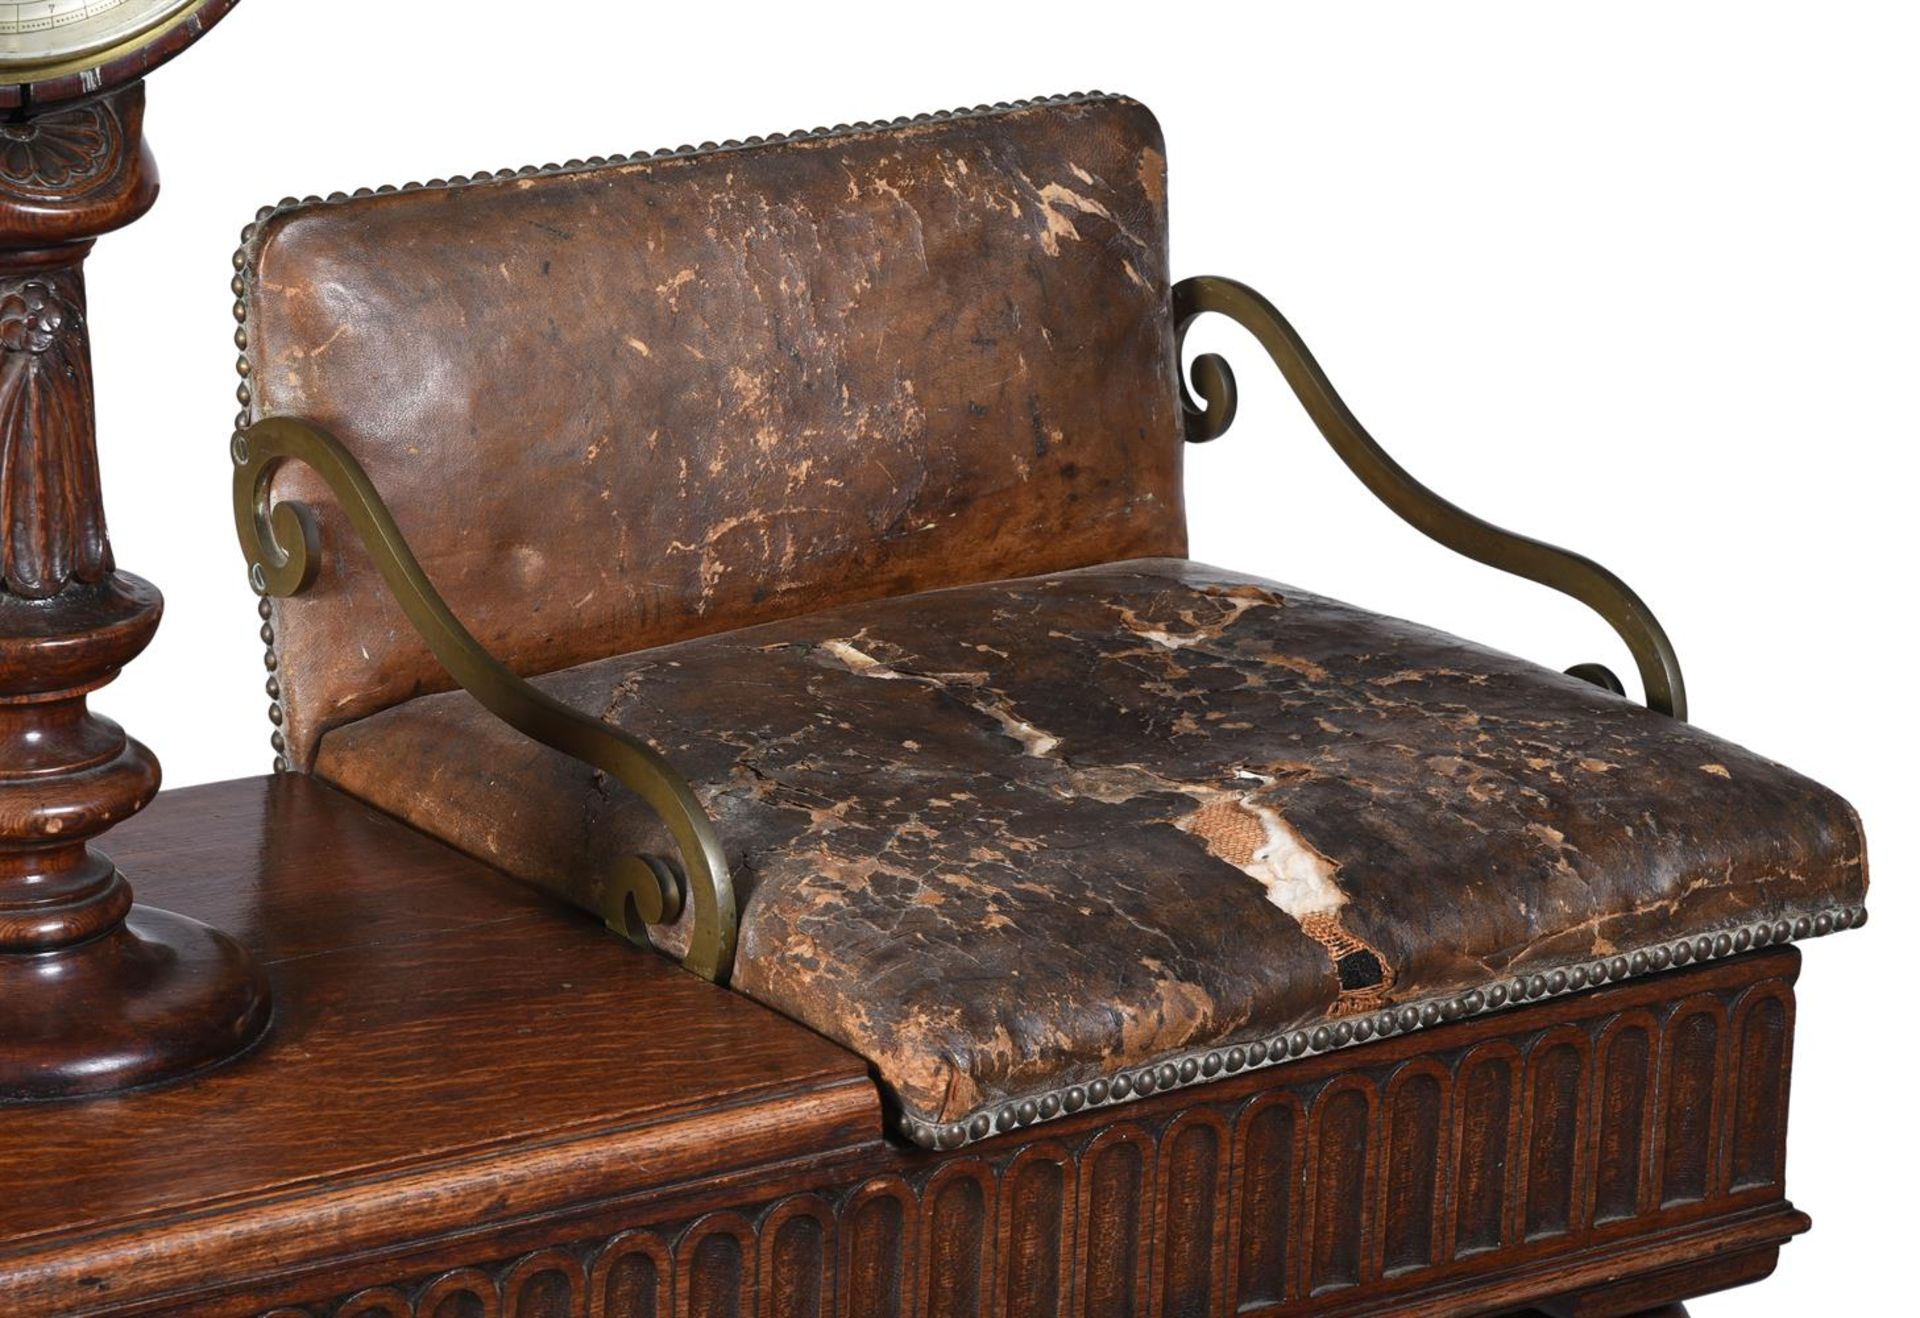 A SET OF LATE VICTORIAN OAK AND BRASS JOCKEY SCALES, BY HENRY POOLEY & SONS, LATE 19TH CENTURY - Image 3 of 4